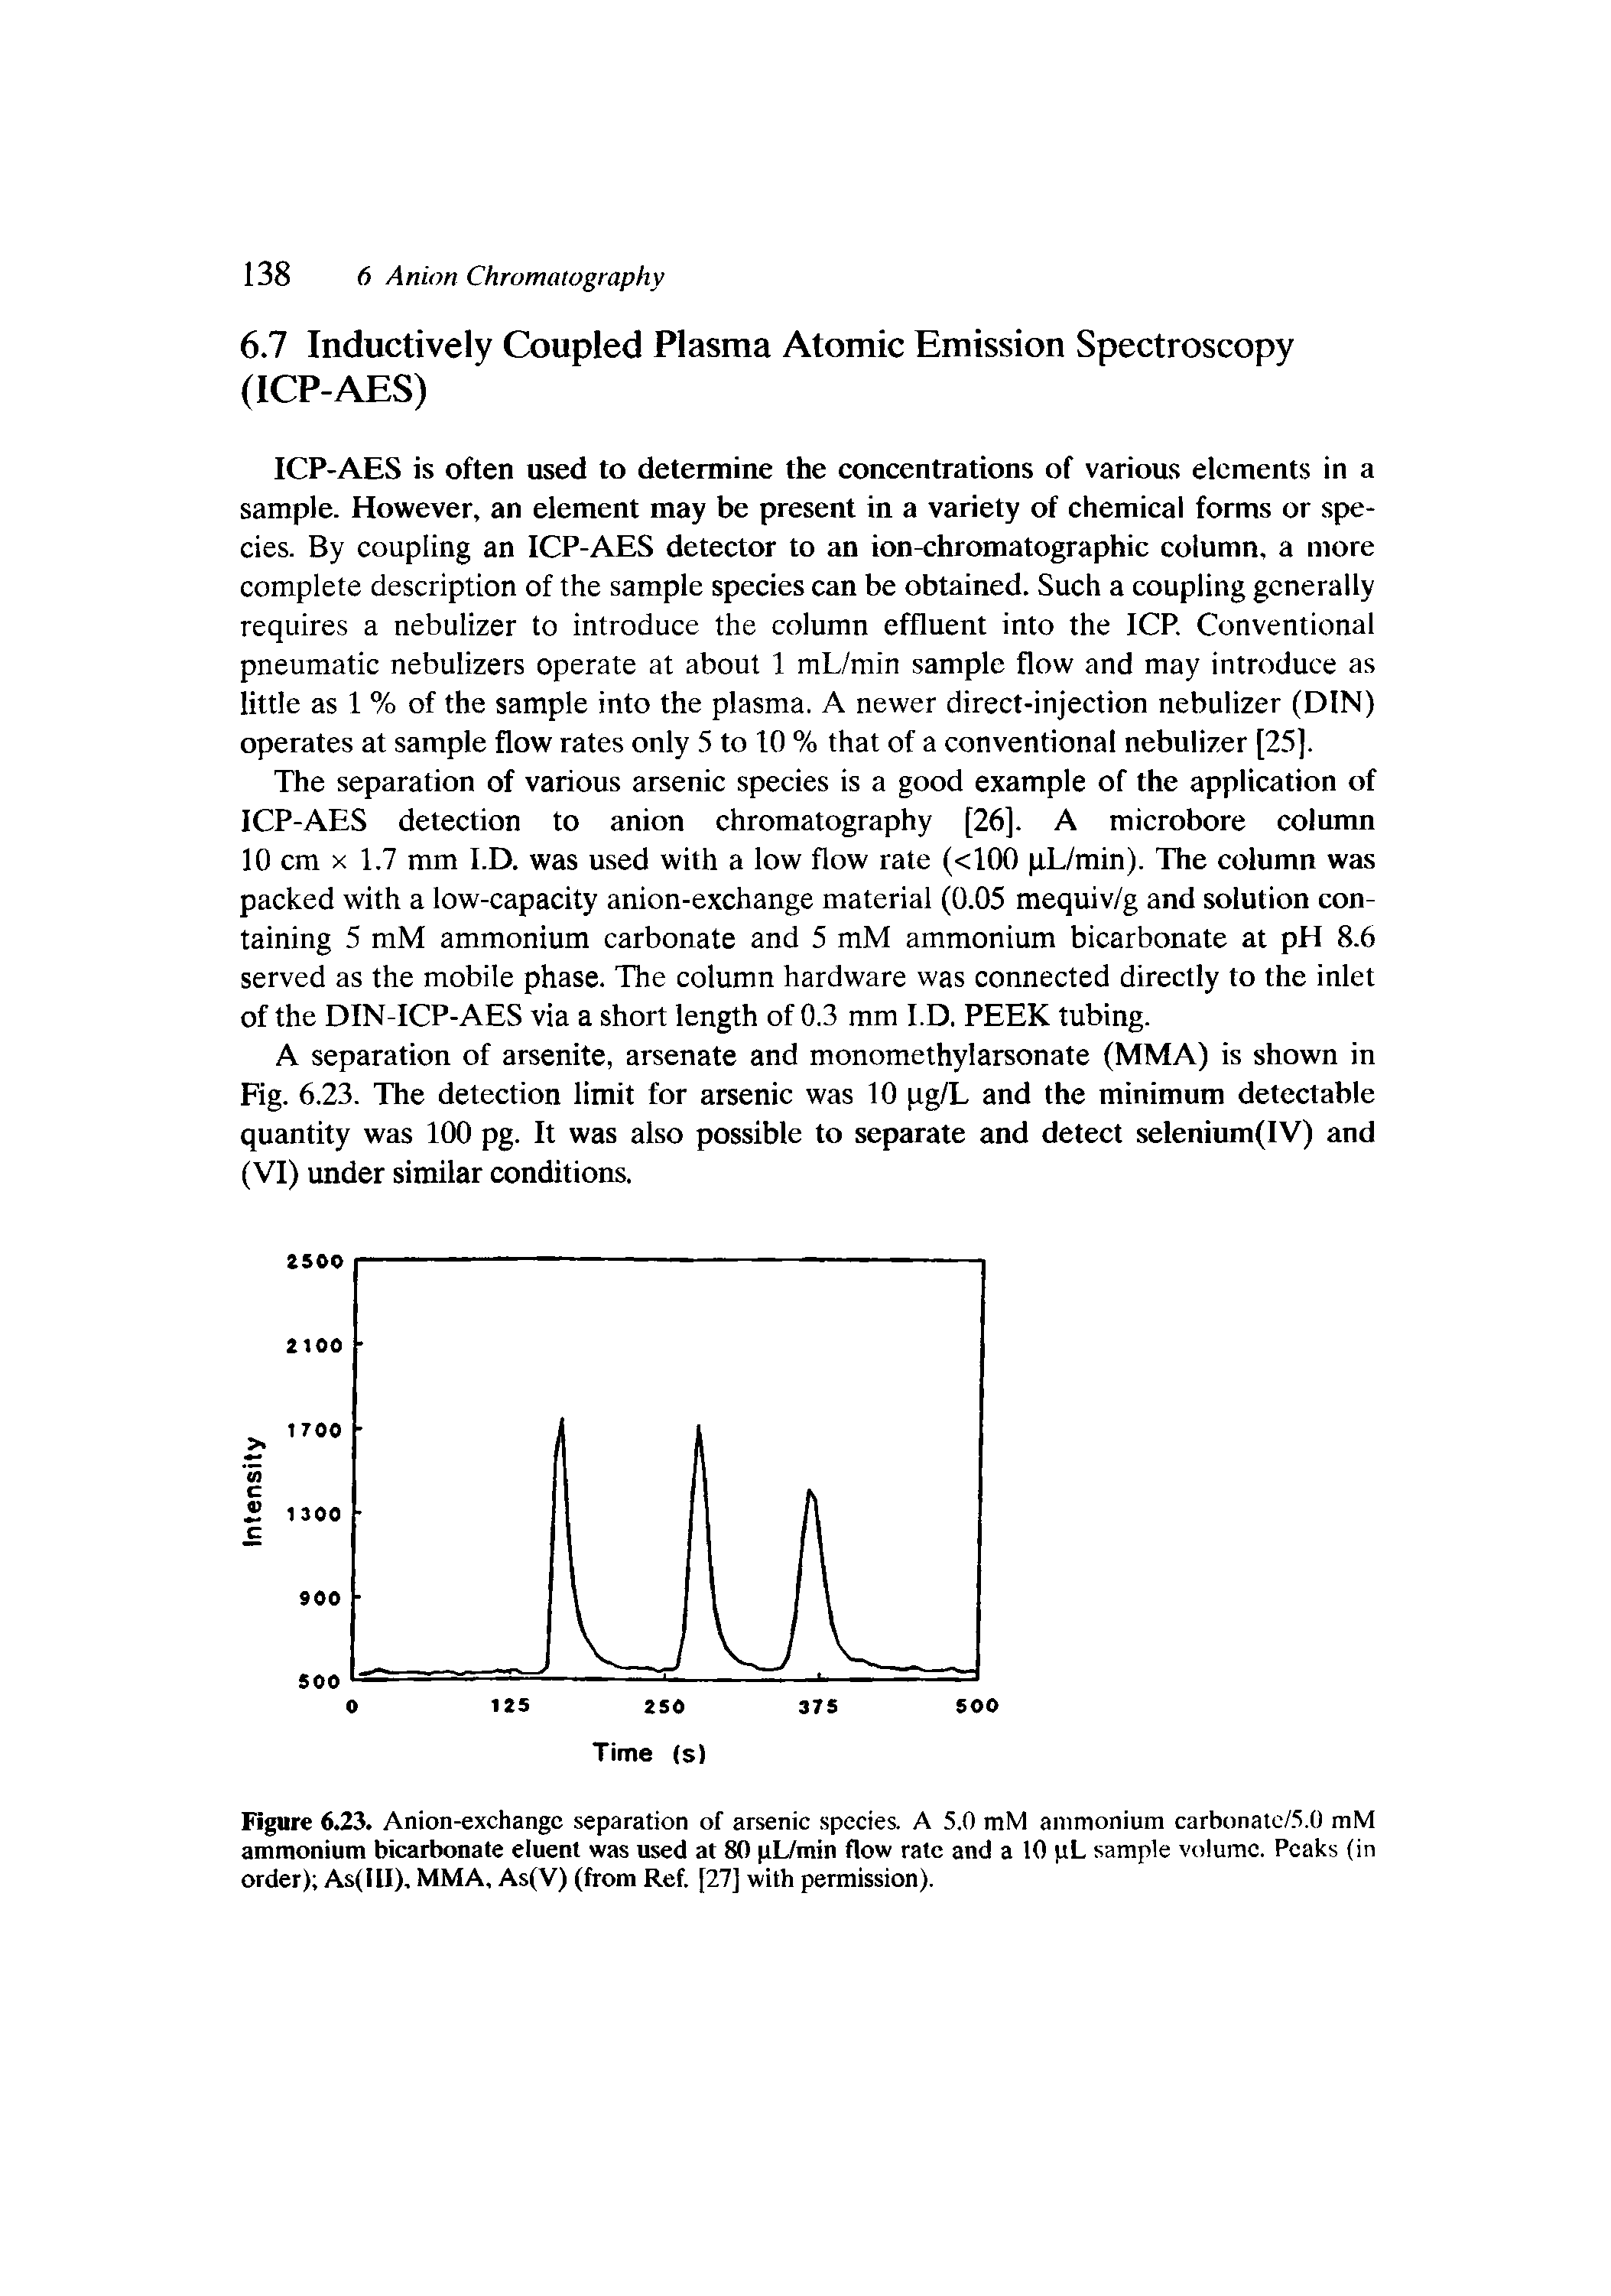 Figure 6.23. Anion-exchangc separation of arsenic species. A 5.0 mM ammonium carbonatc/5.0 mM ammonium bicarbonate eluent was used at 80 pL7min flow rate and a 10 pL sample volume. Peaks (in order) As(III), MMA, As(V) (from Ref. [27] with permission).